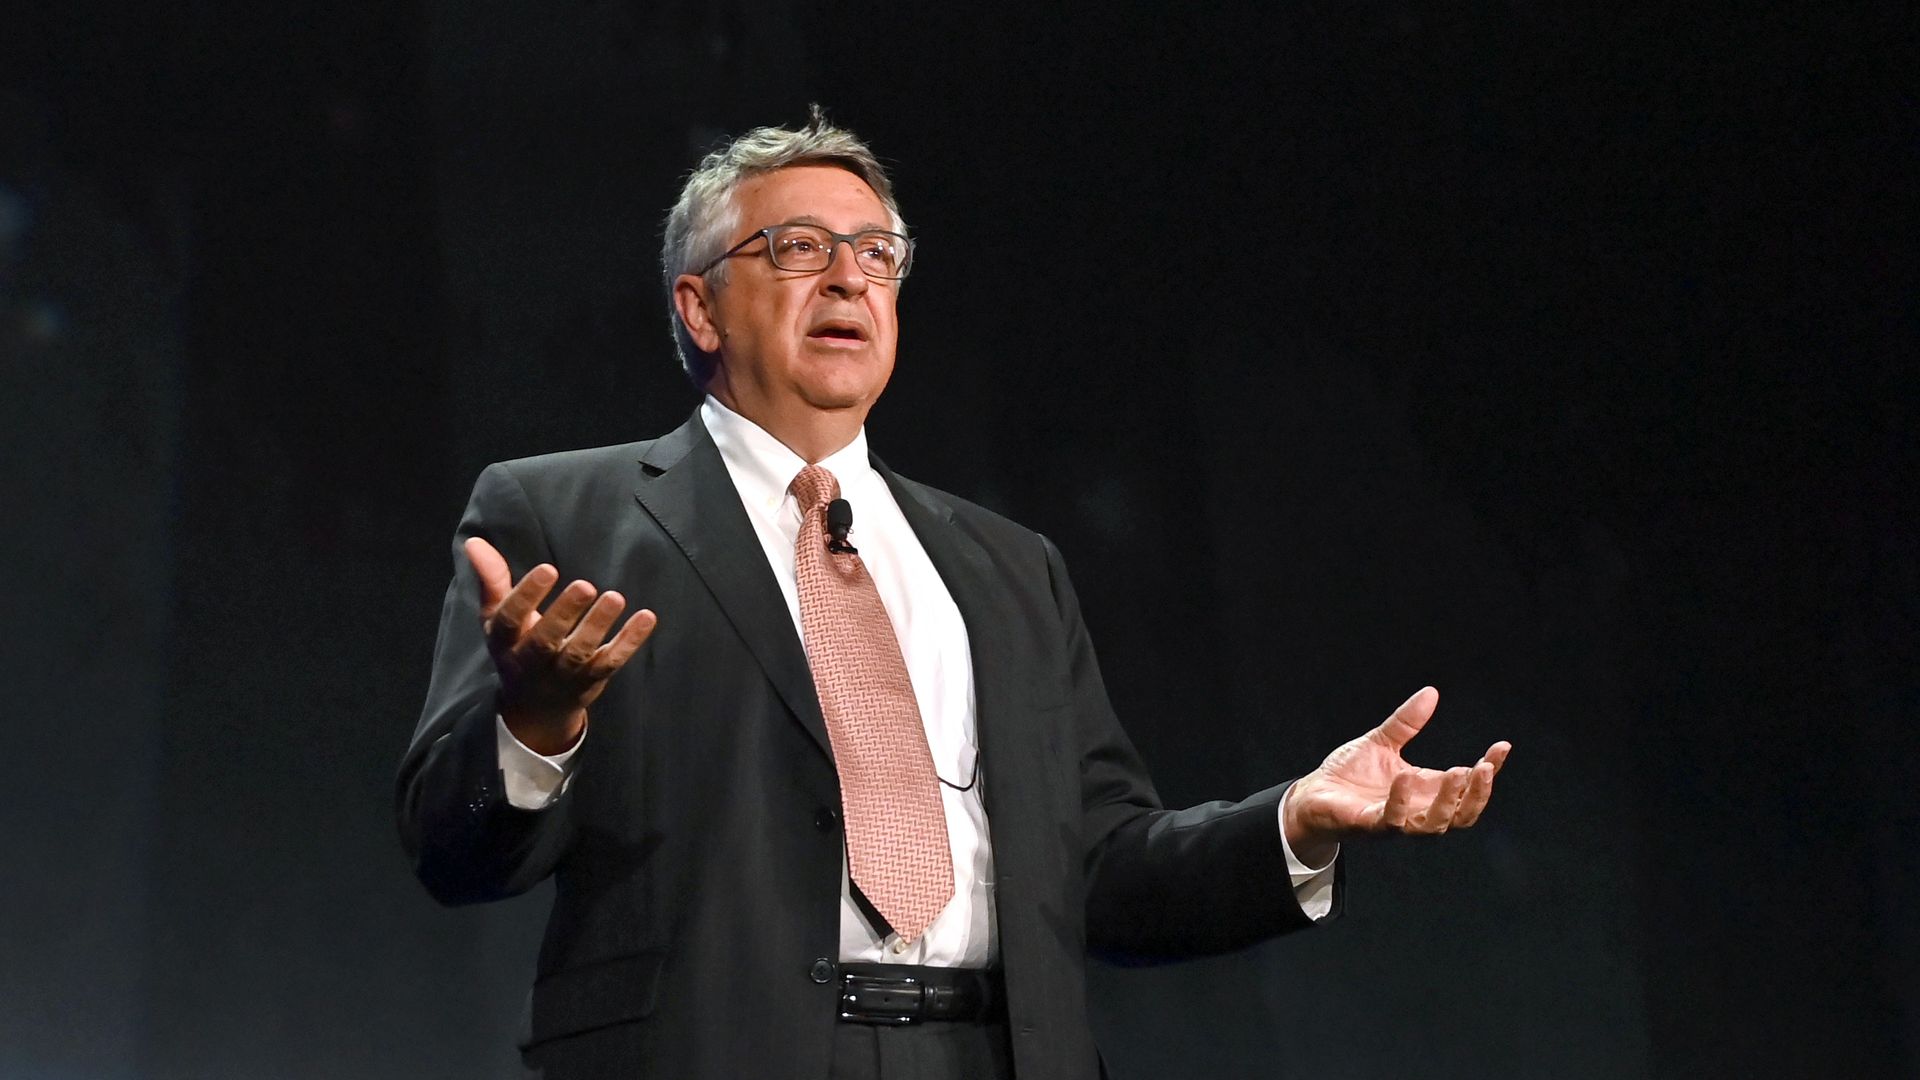 Sony Pictures CEO Tony Vinciquerra speaks onstage during CinemaCon 2021 at The Colosseum at Caesars Palace in Las Vegas.